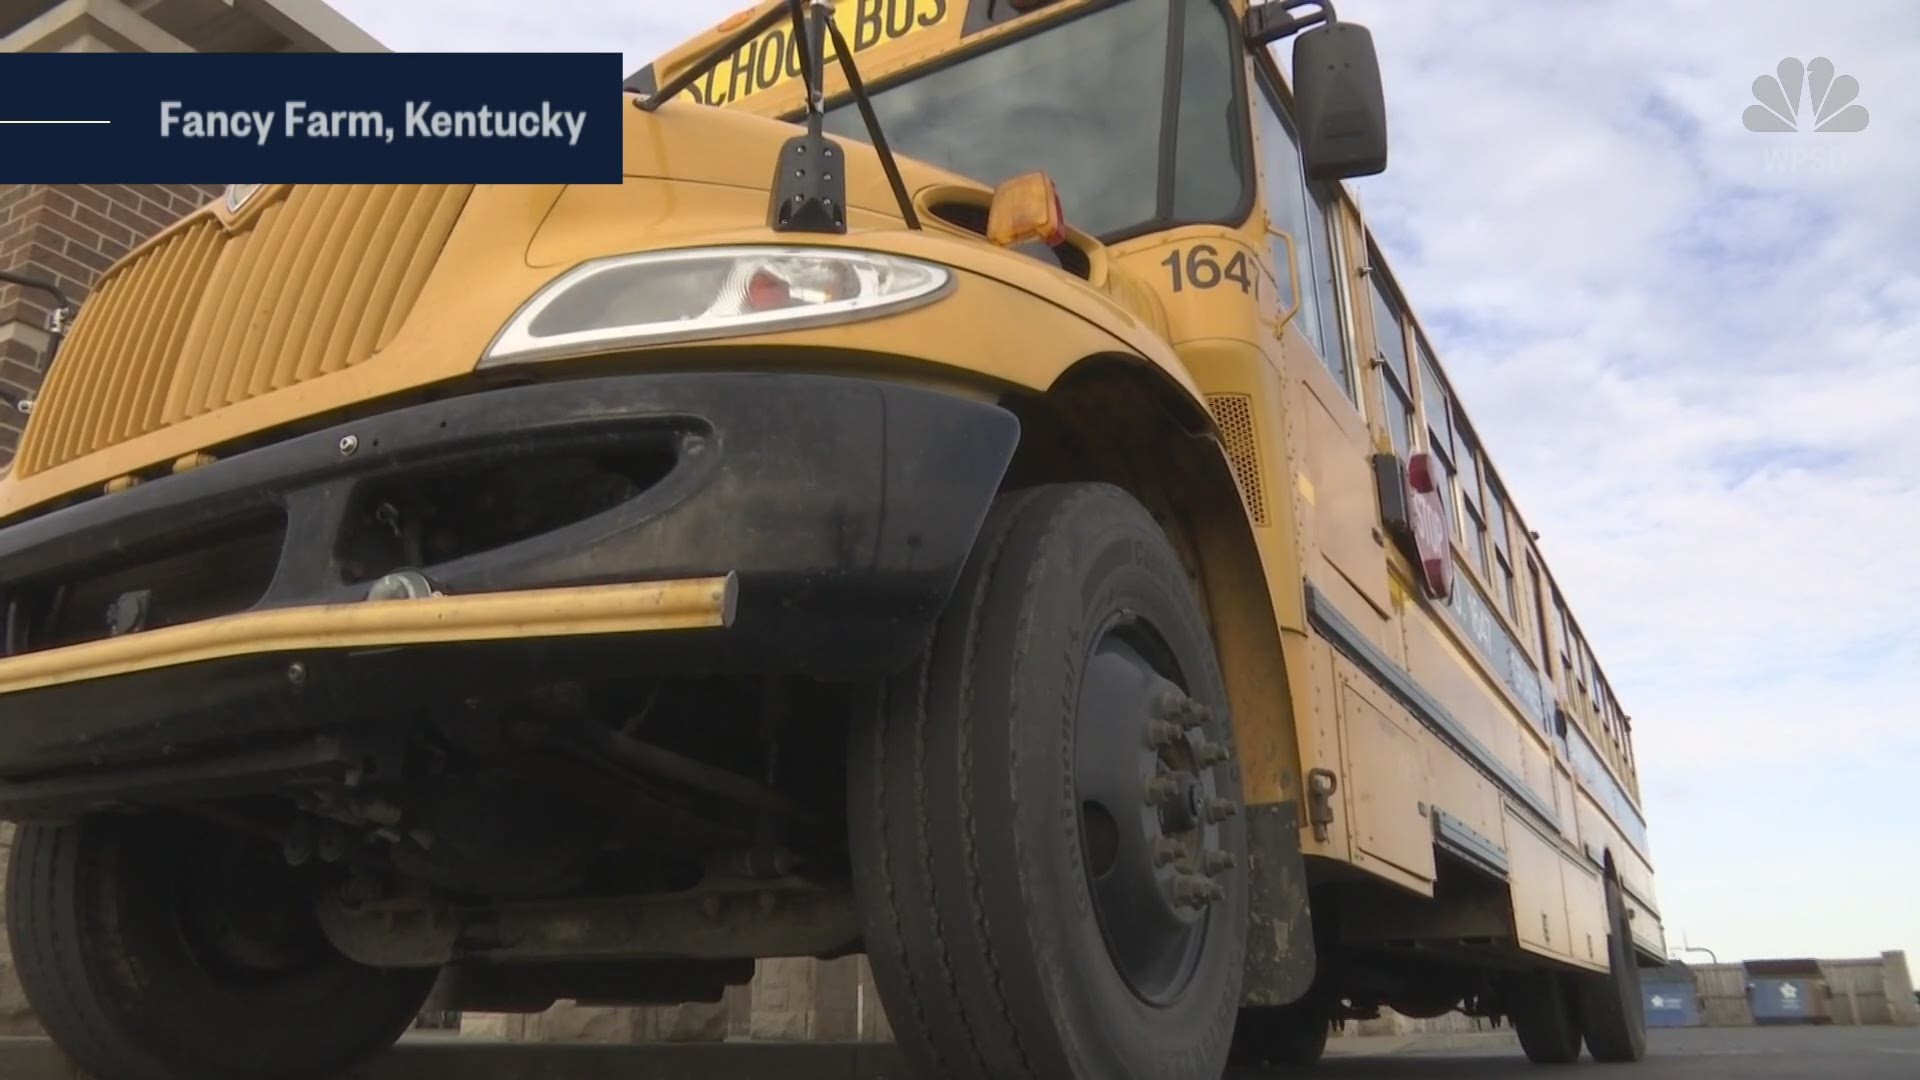 An elementary school principal in Kentucky is pulling double-duty after her school faced a shortage of school bus drivers due to the pandemic.